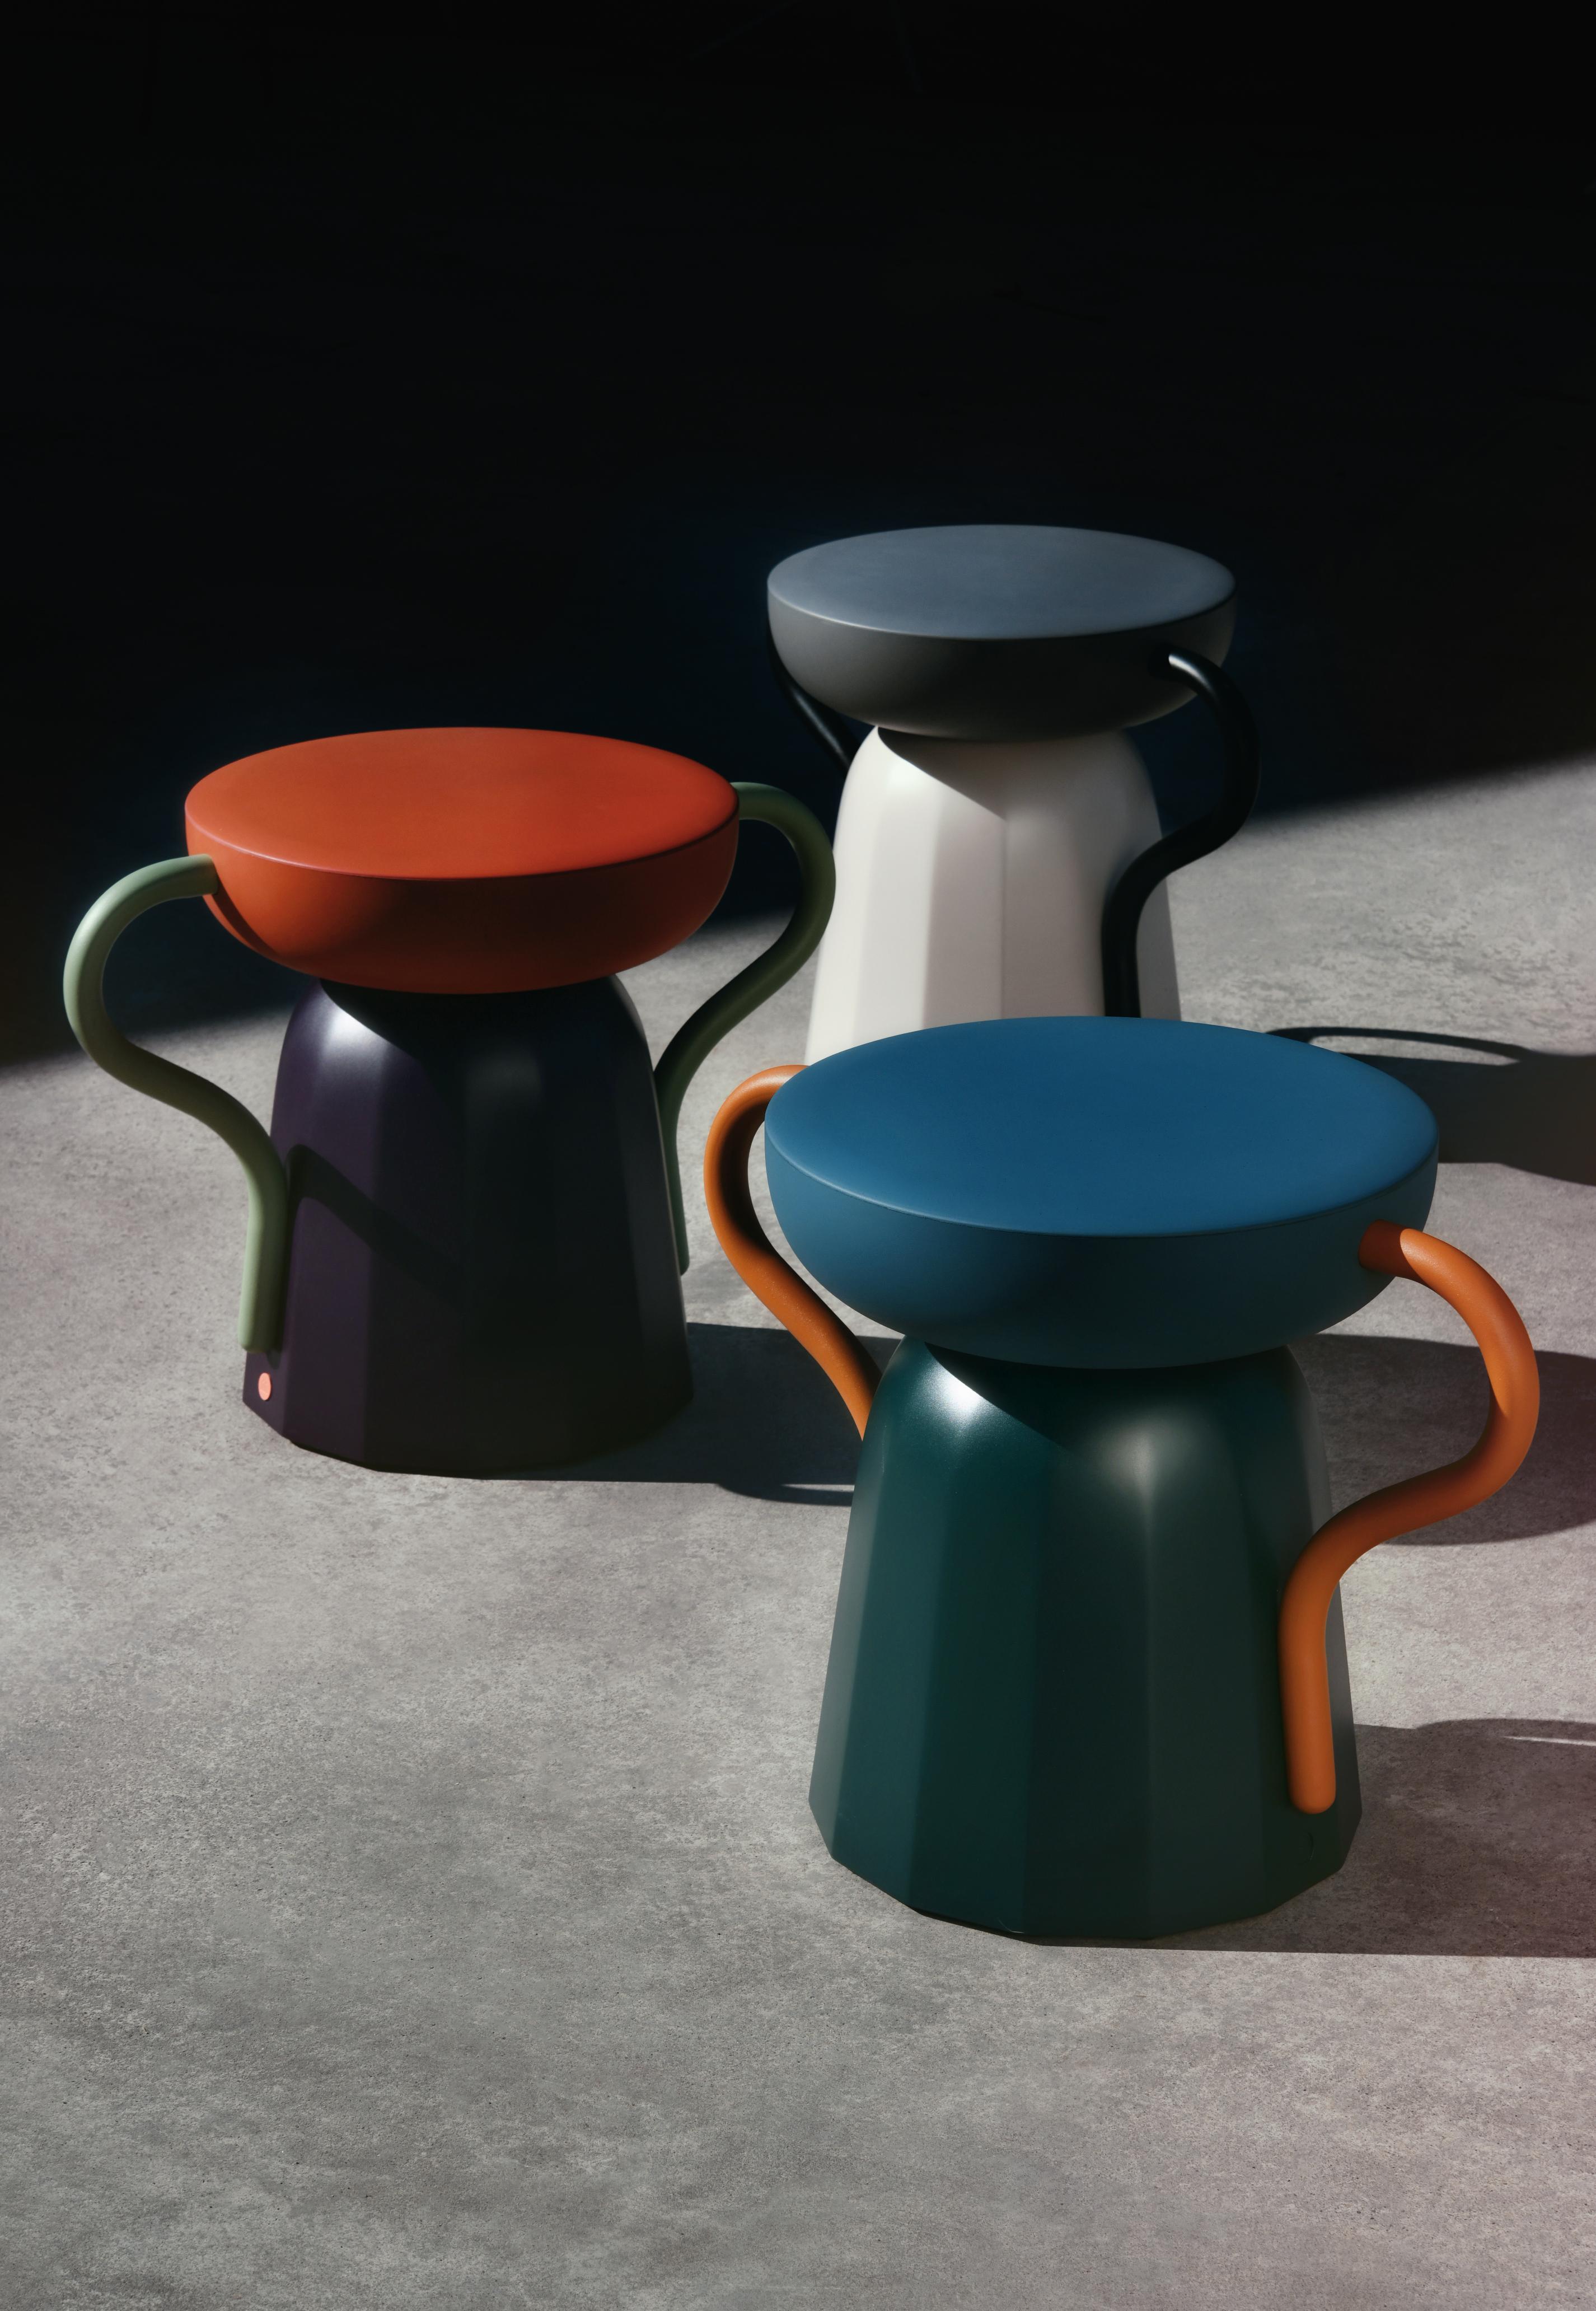 Allié is a two-in-one design — both a stool and an occasional table condensed into a small object with a ton of character. A totem of bold aesthetic, hands resting firmly on its hips. Designed by Luca Nichetto.

Stool/table variant 1 — Coral